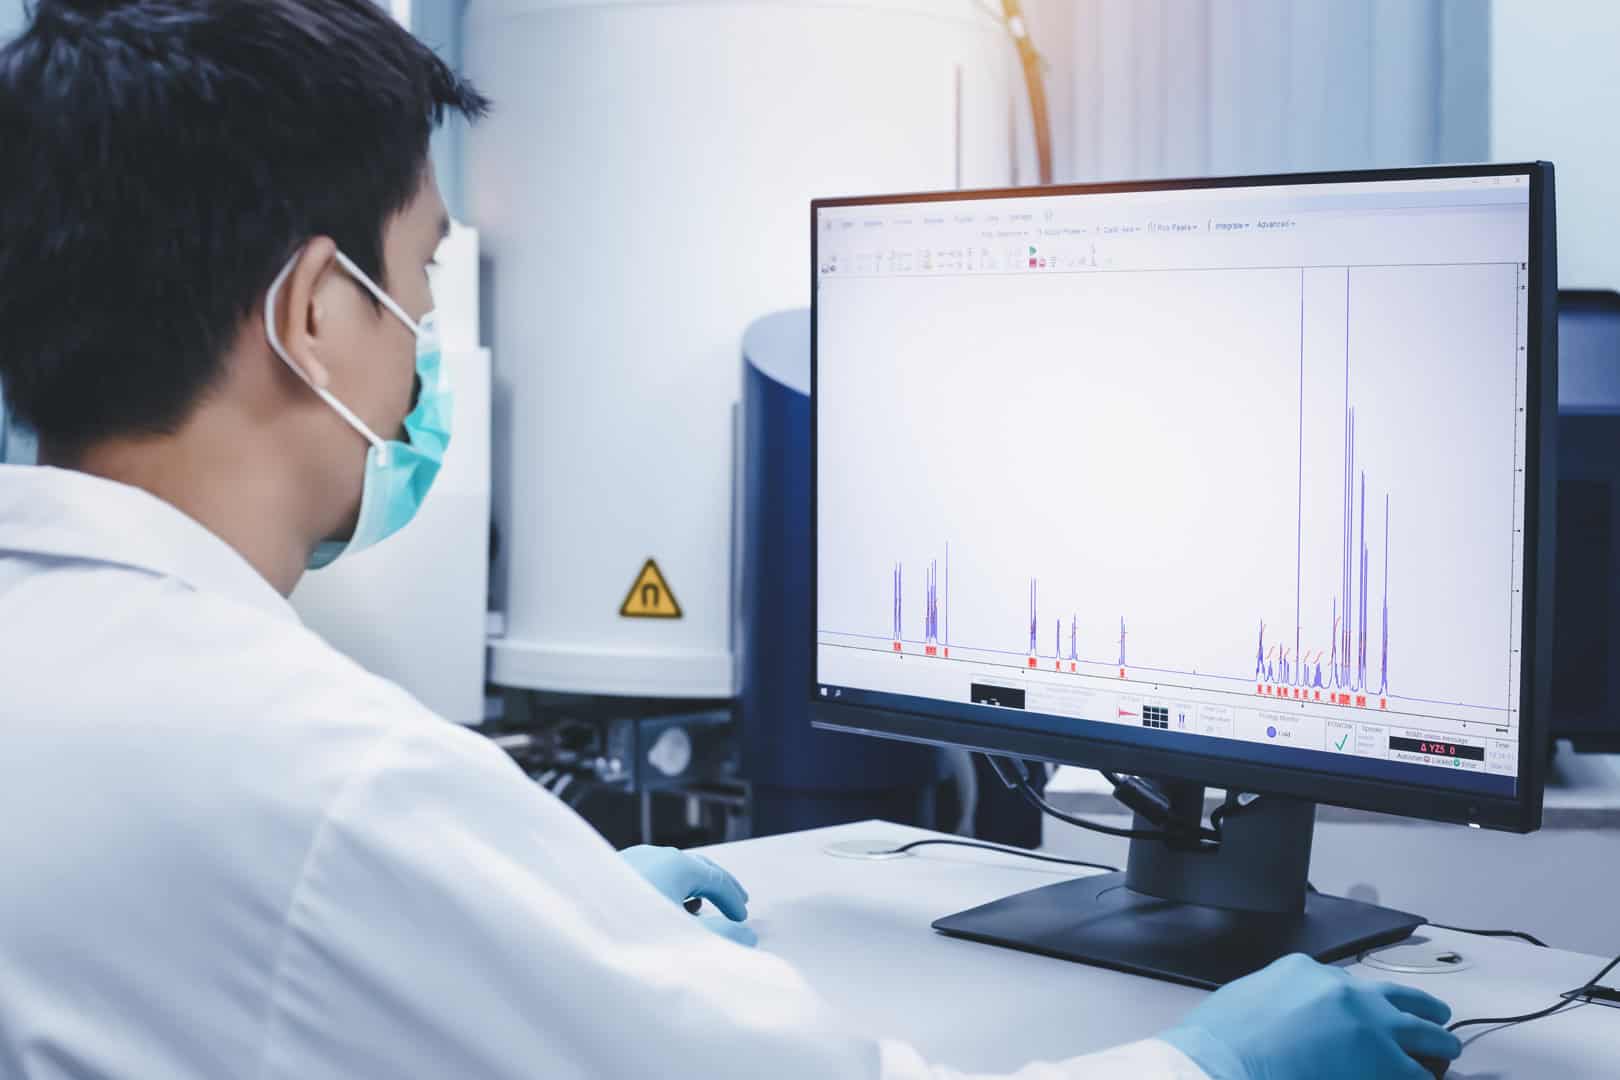 Azure Summit Technology | Scientist man checks the spectrum of sample analysis by nuclear magnetic resonance spectroscopy, NMR spectroscopy, as shown on a computer monitor in the laboratory.